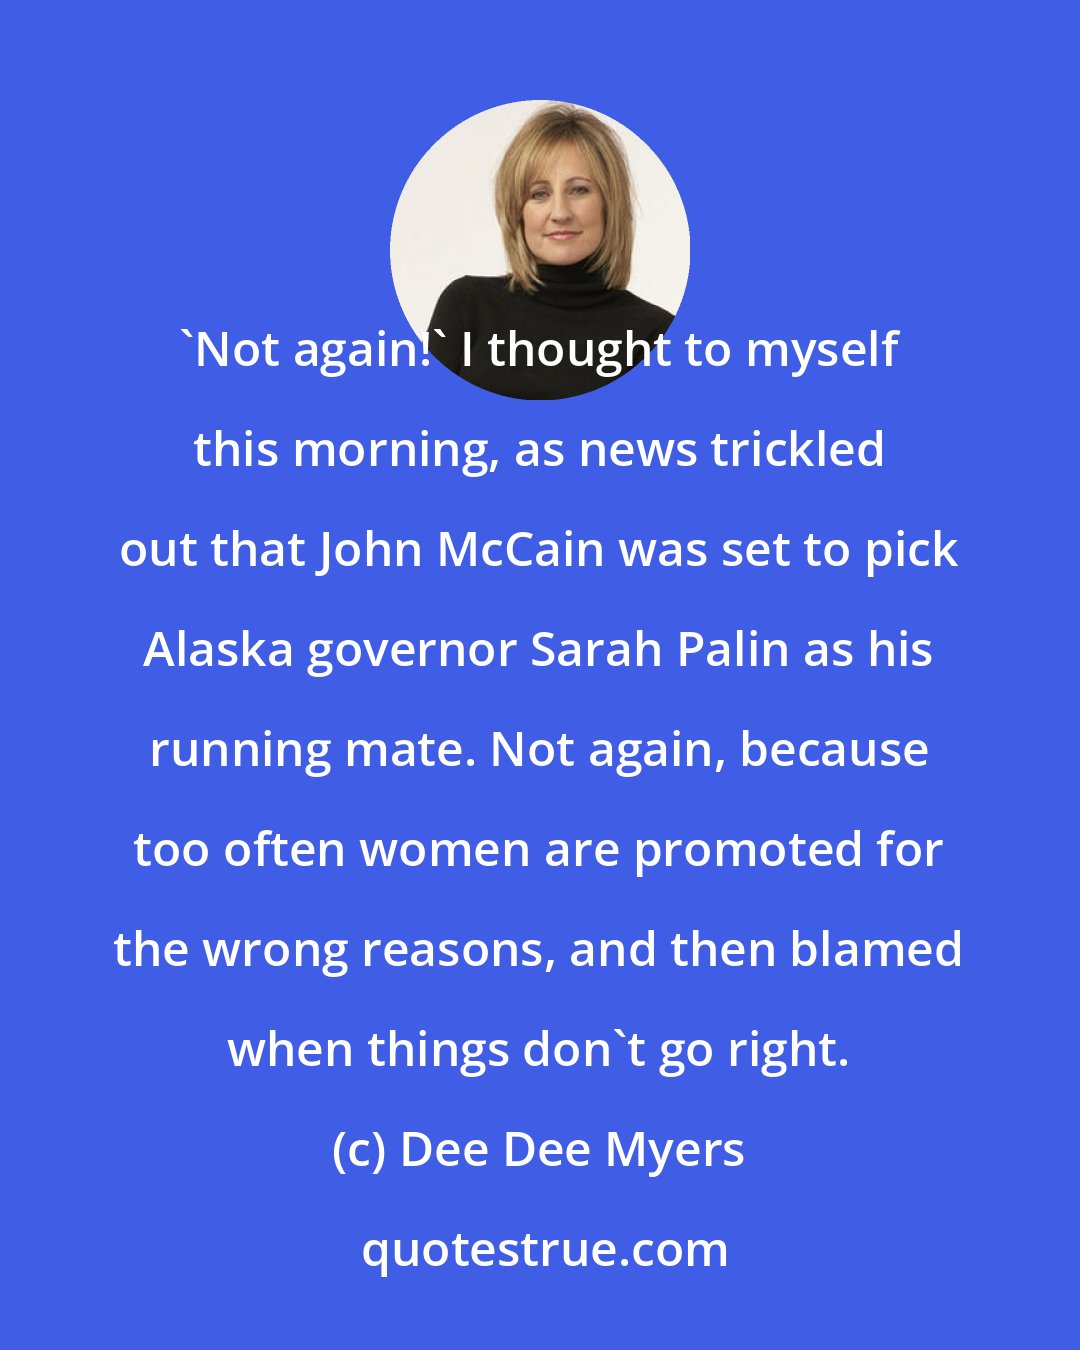 Dee Dee Myers: 'Not again!' I thought to myself this morning, as news trickled out that John McCain was set to pick Alaska governor Sarah Palin as his running mate. Not again, because too often women are promoted for the wrong reasons, and then blamed when things don't go right.